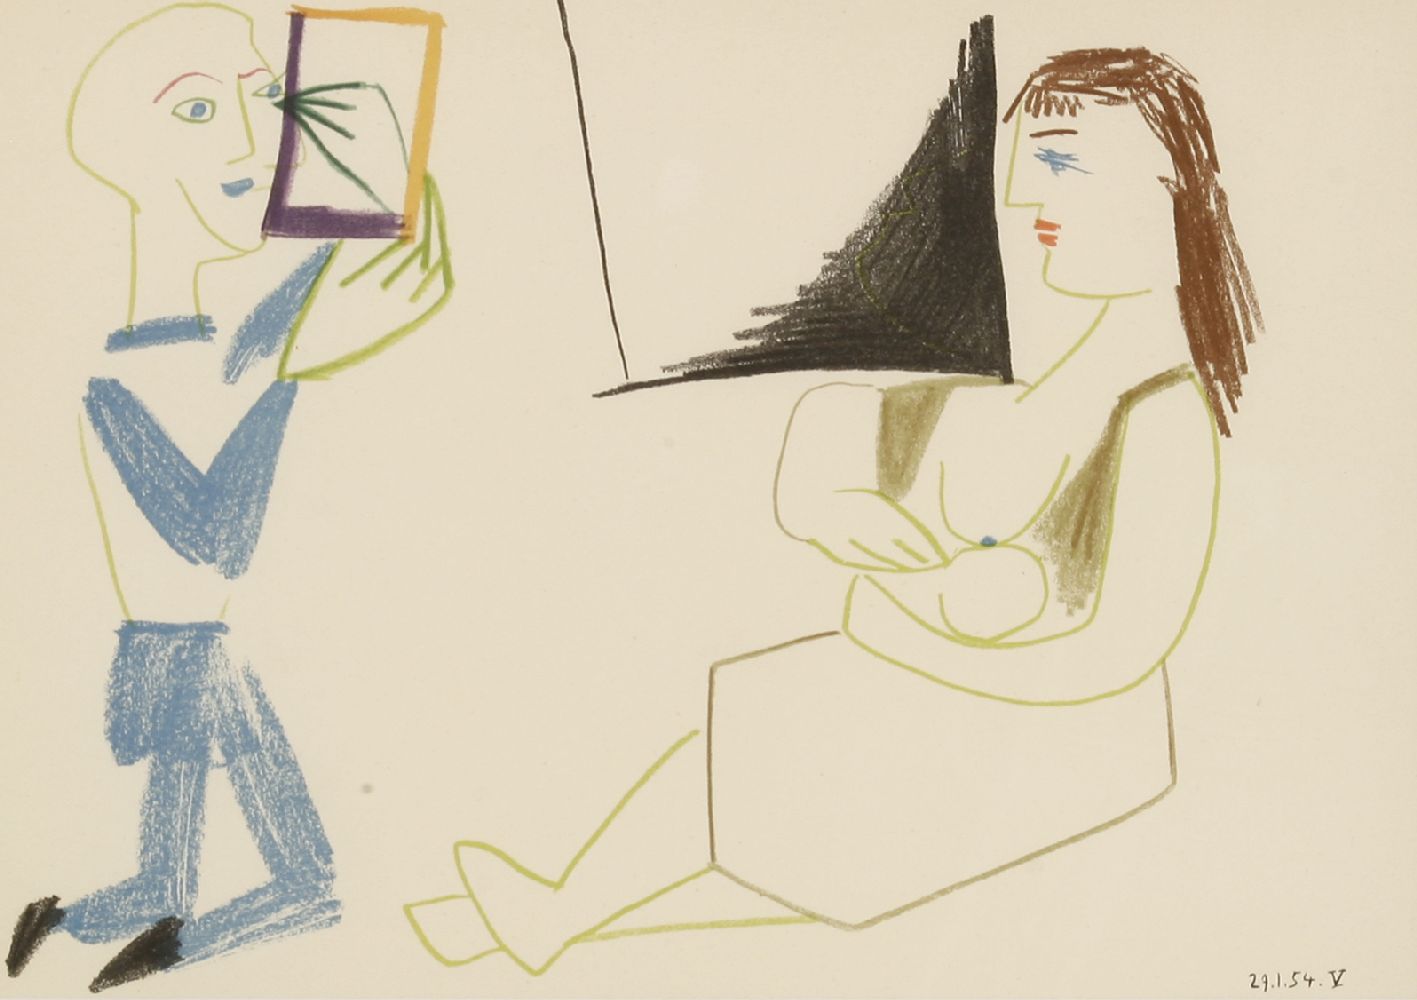 *After Pablo Picasso (Spanish, 1881-1973)30.1.54.I;29.1.54.VTwo lithographs printed in colours, - Image 3 of 4